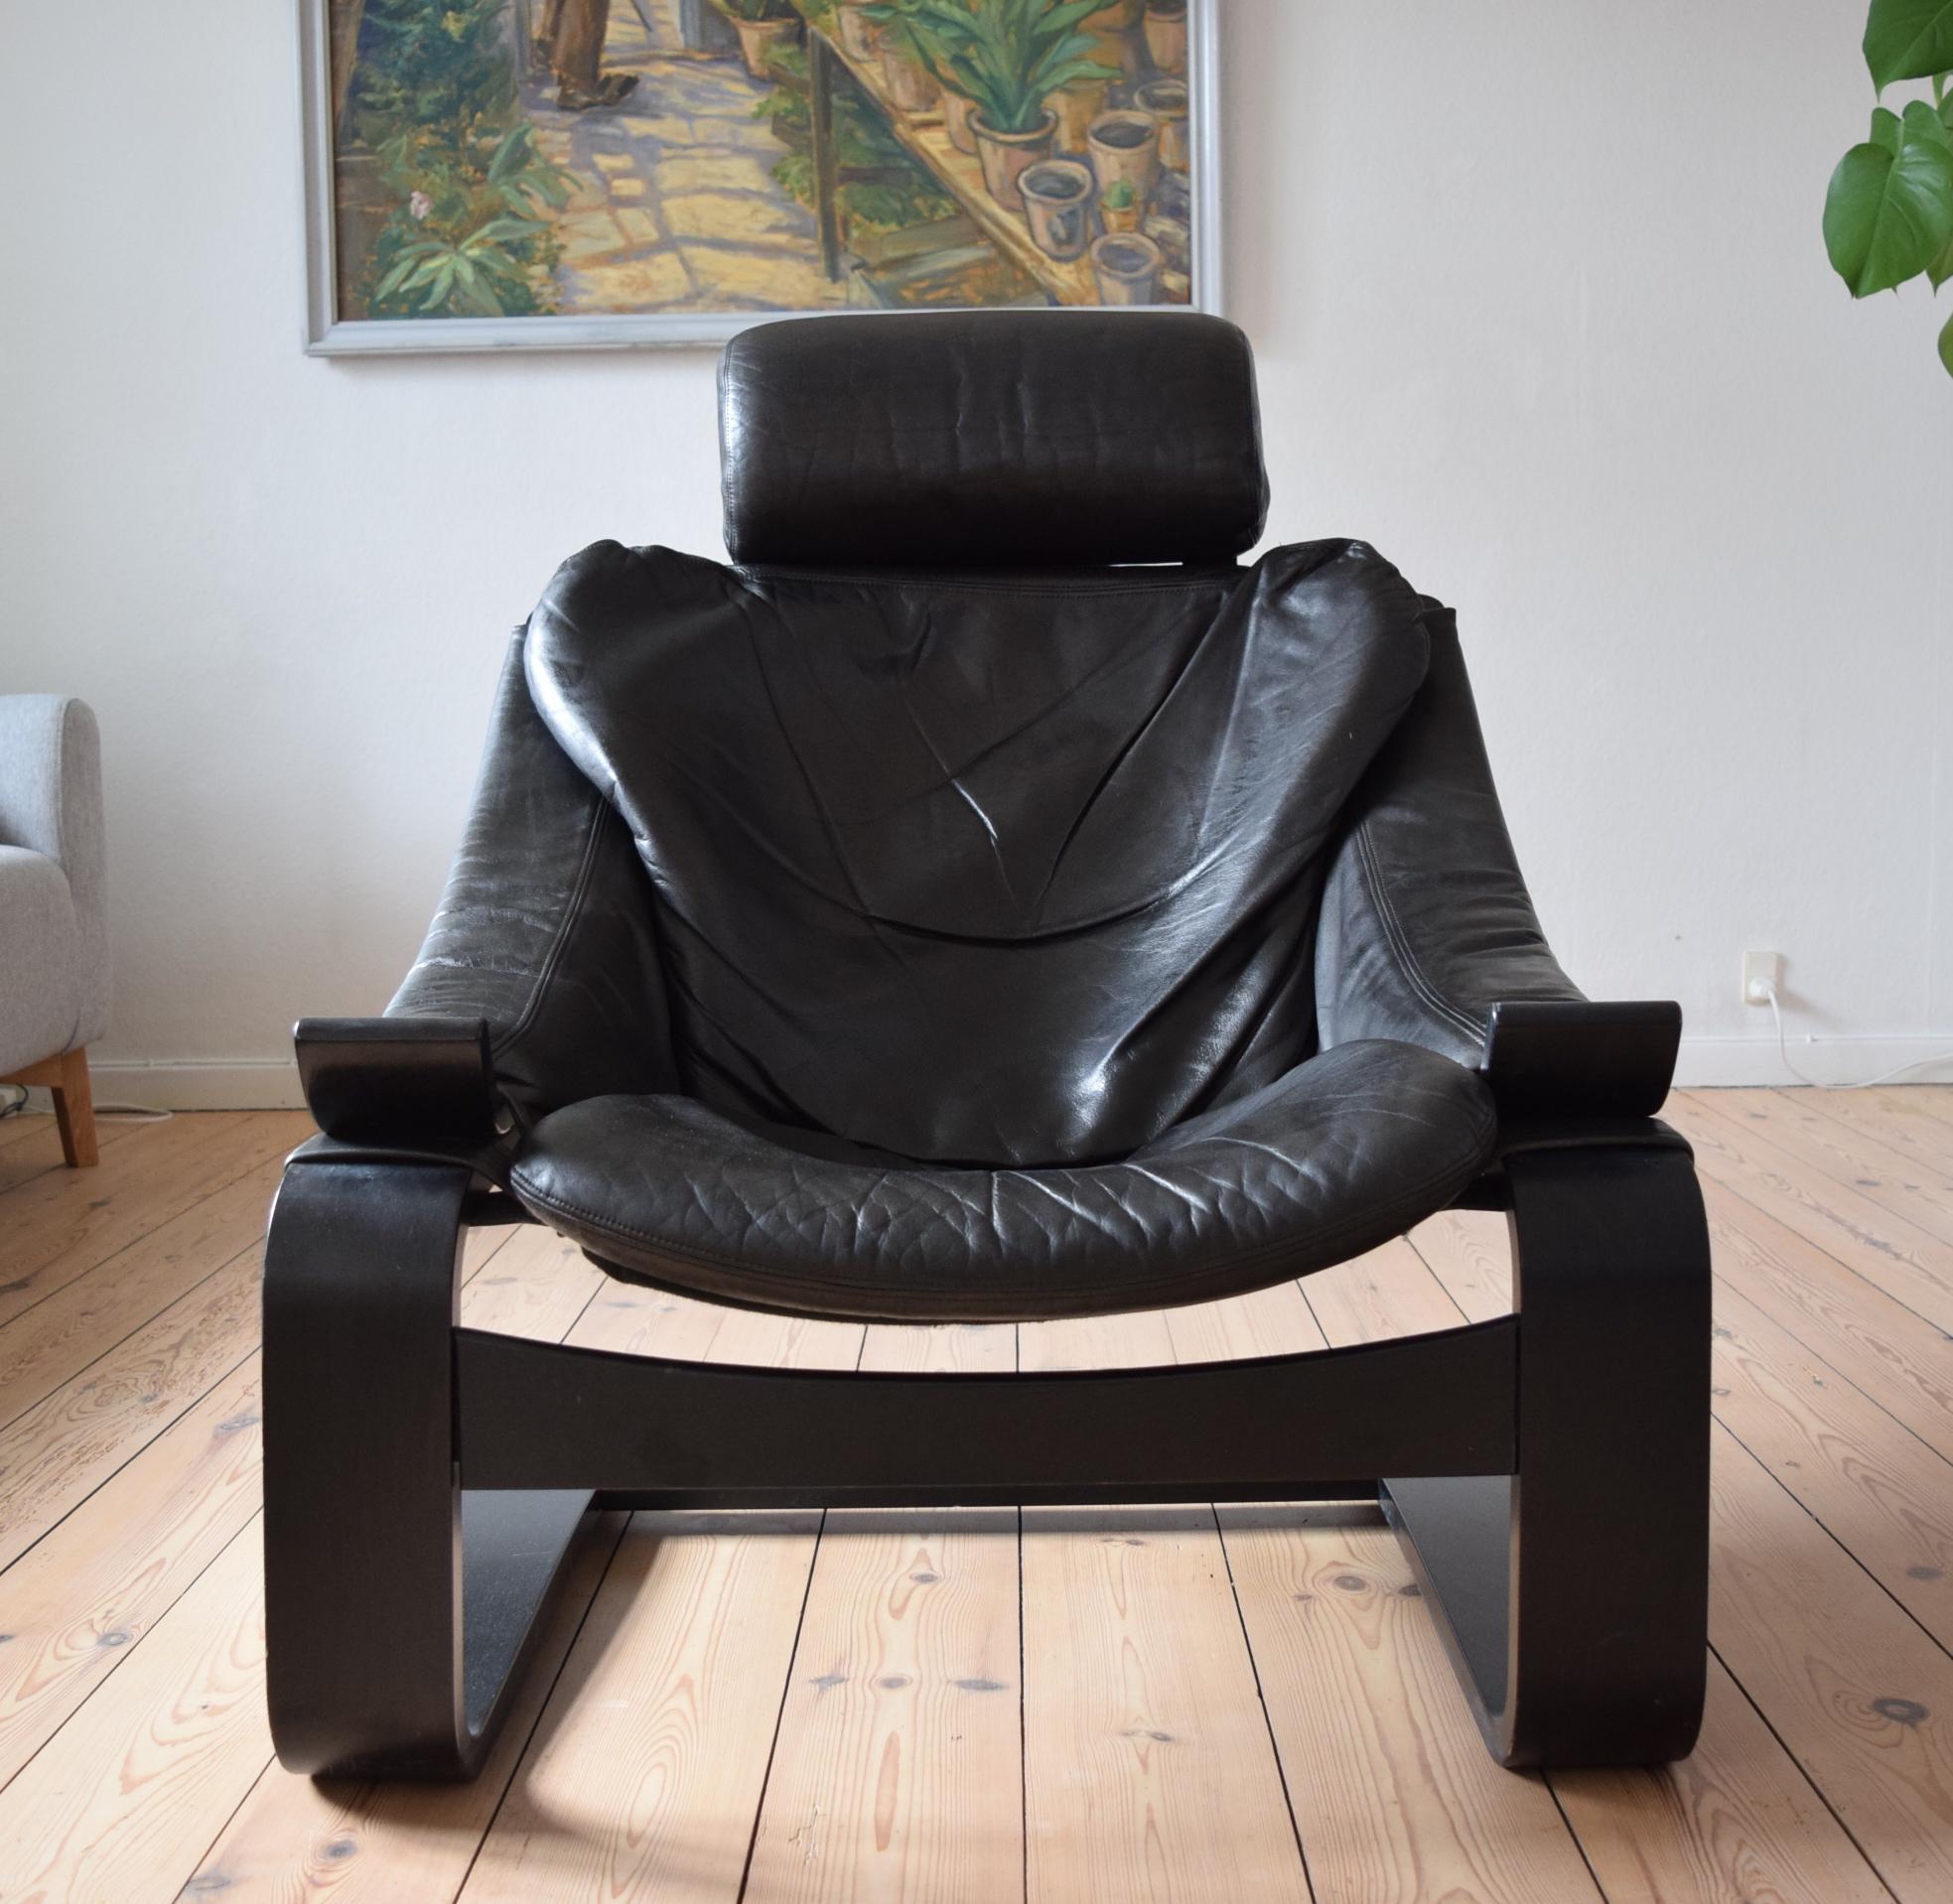 Midcentury Swedish Leather Kroken Chairs by Ake Fribytter for Nelo, 1974 For Sale 6